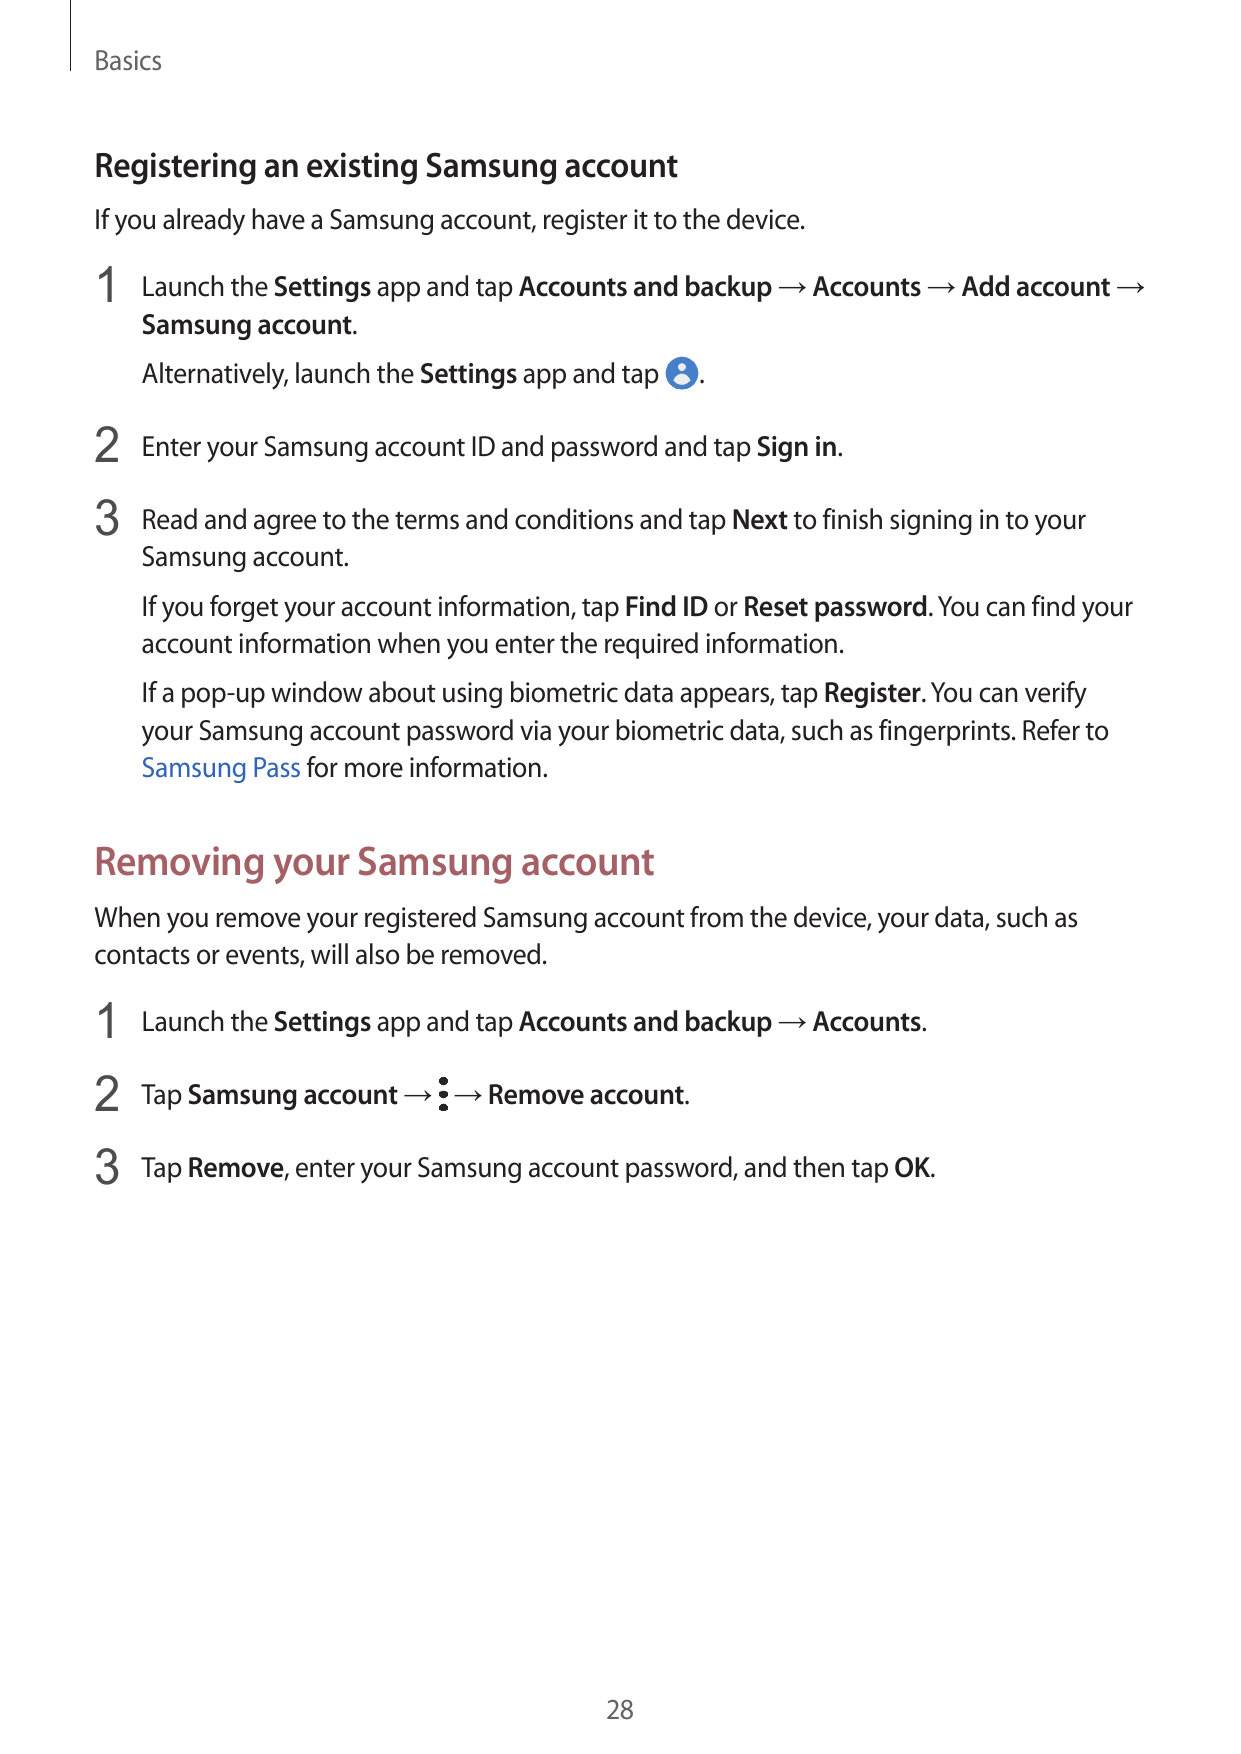 BasicsRegistering an existing Samsung accountIf you already have a Samsung account, register it to the device.1 Launch the Setti